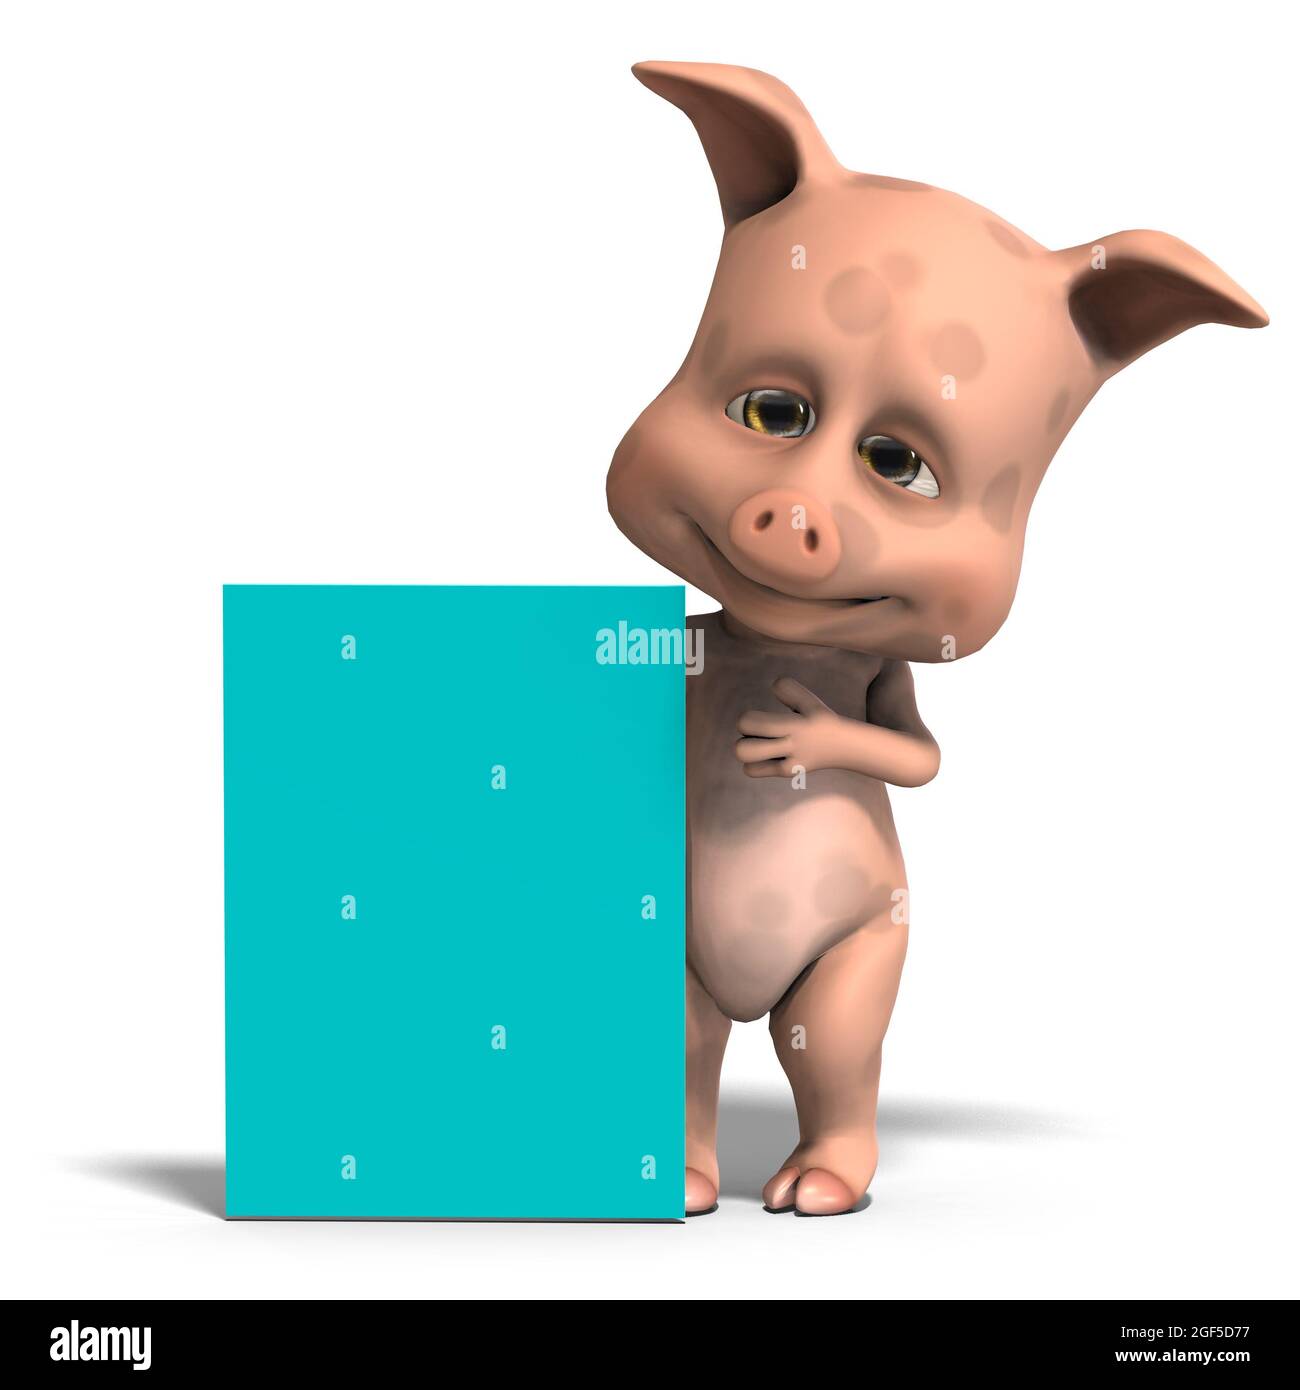 invitation from a cute and funny toon pig, 3d-illustration Stock Photo